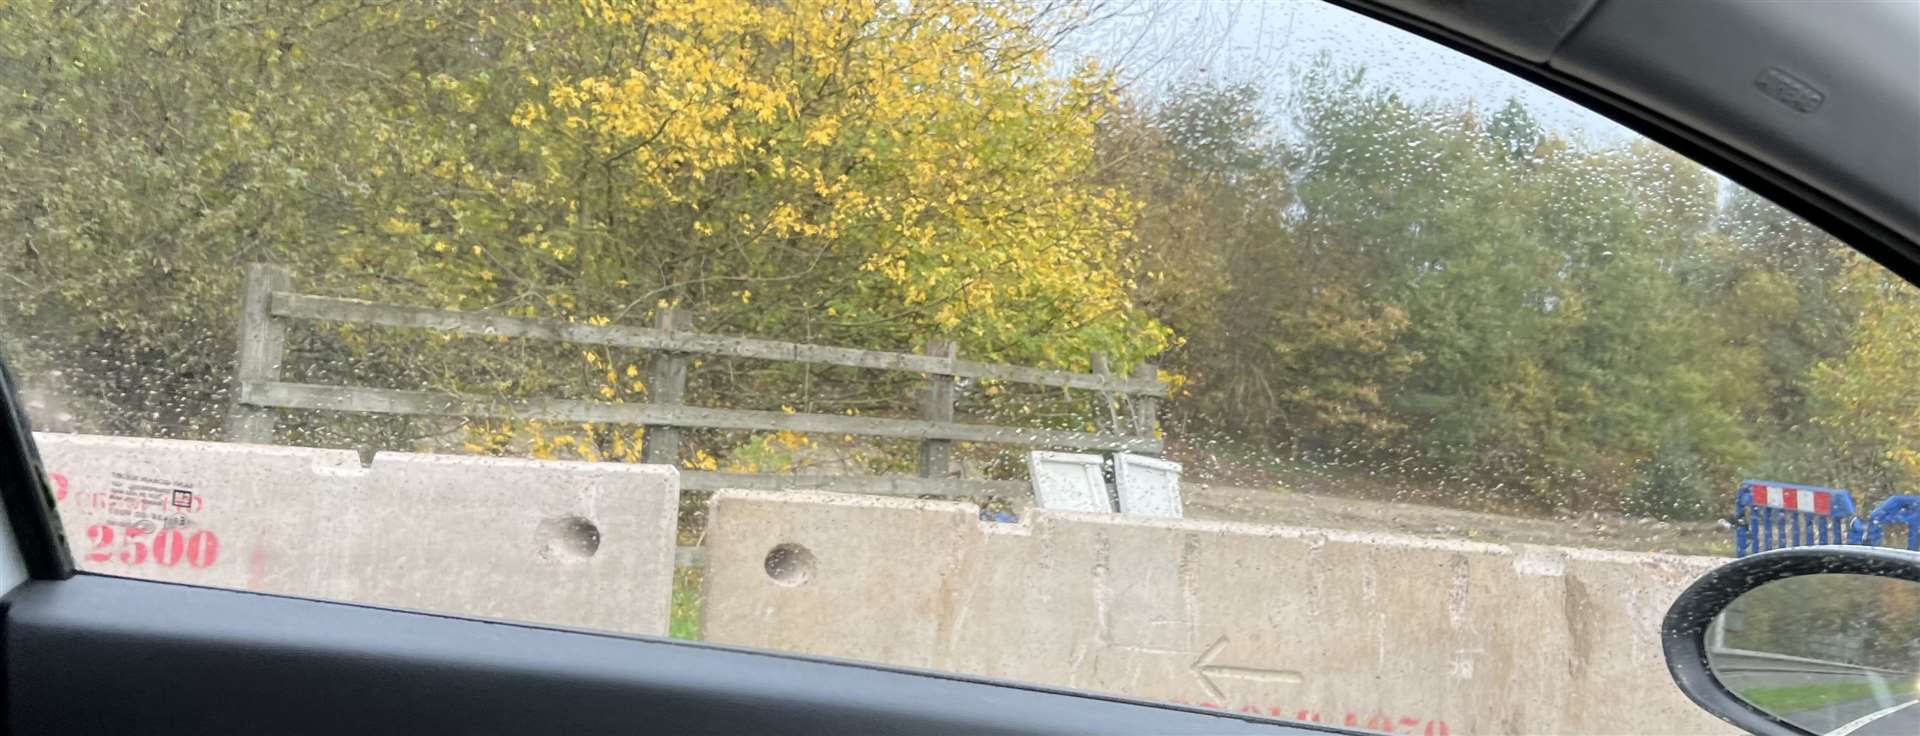 The blocked-off illegal dumping ground off the A289 Hasted Road